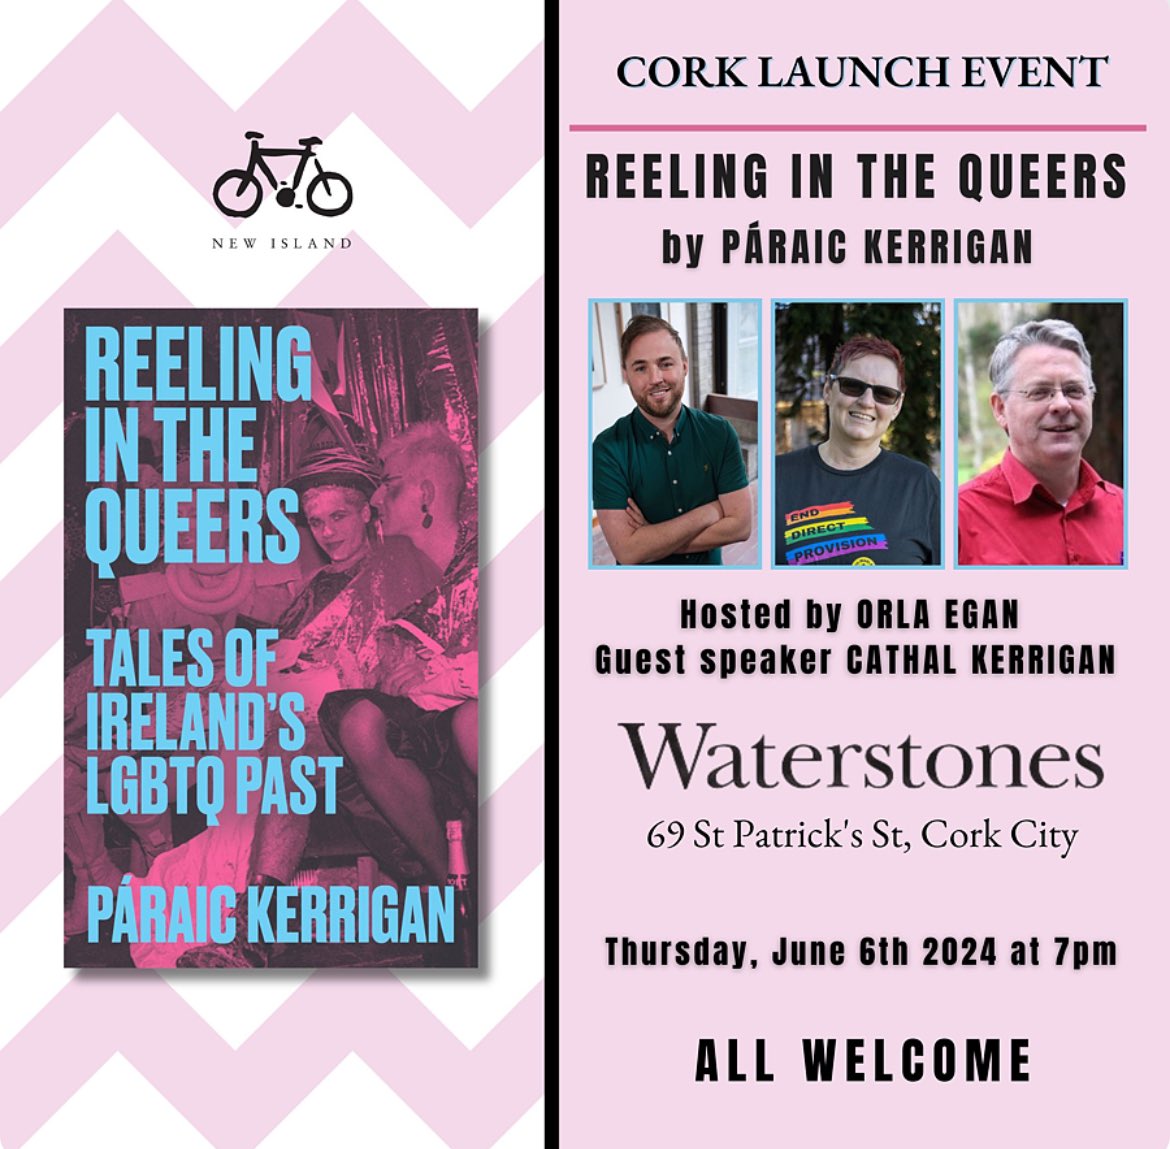 Reeling in the Queers is being launched!! Kicking off Pride season are the Dublin and Cork events. Dublin 📖 🚀: June 5 in Hodges Figgis from 6-8. Cork 📖 🚀: June 6 in Waterstones on Patrick Street from 7pm Wine, craic and some books are guaranteed.